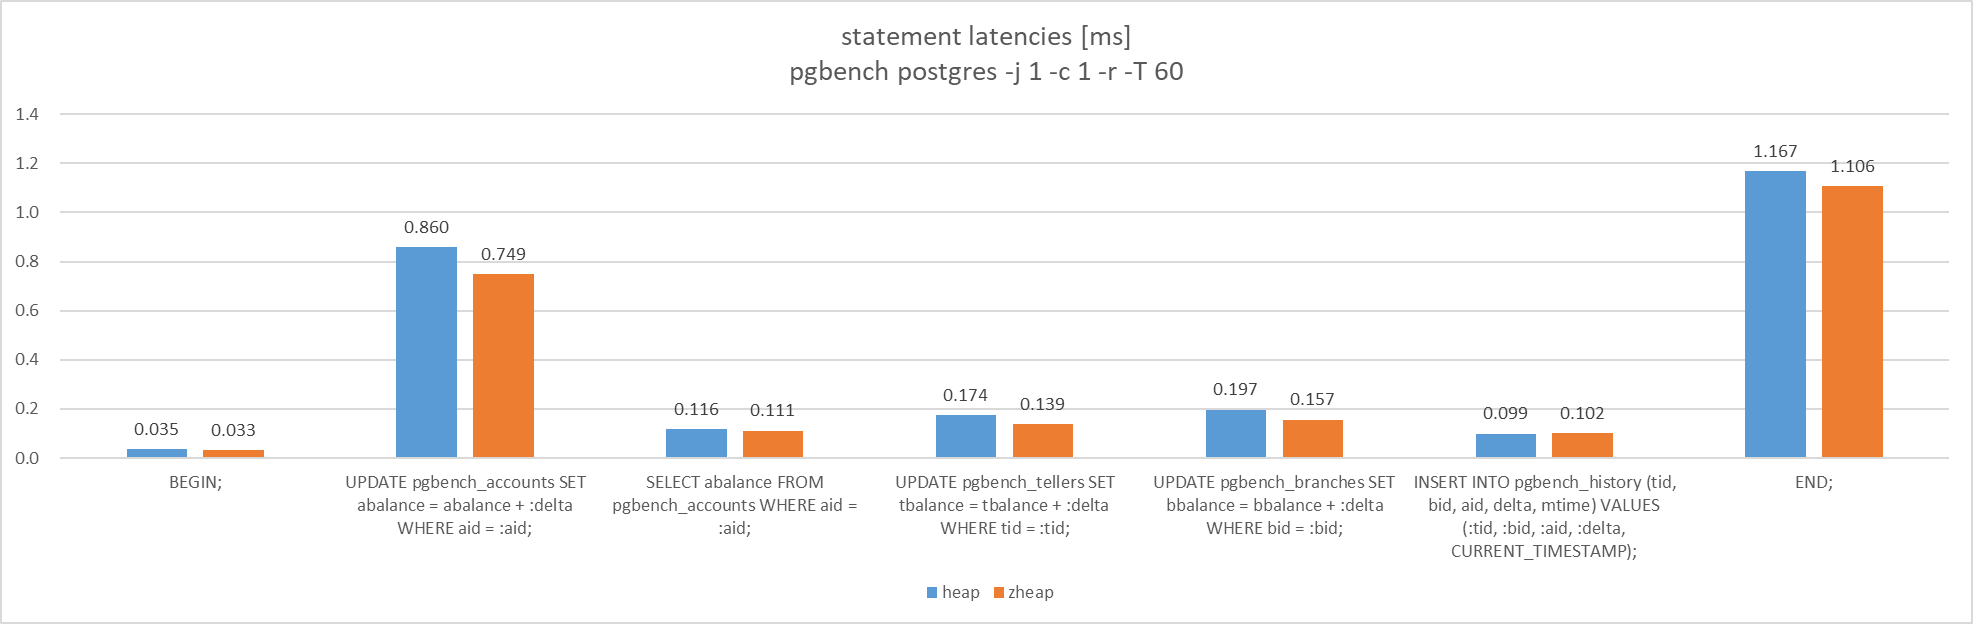 _images/zheap_pgbench_latencies.png